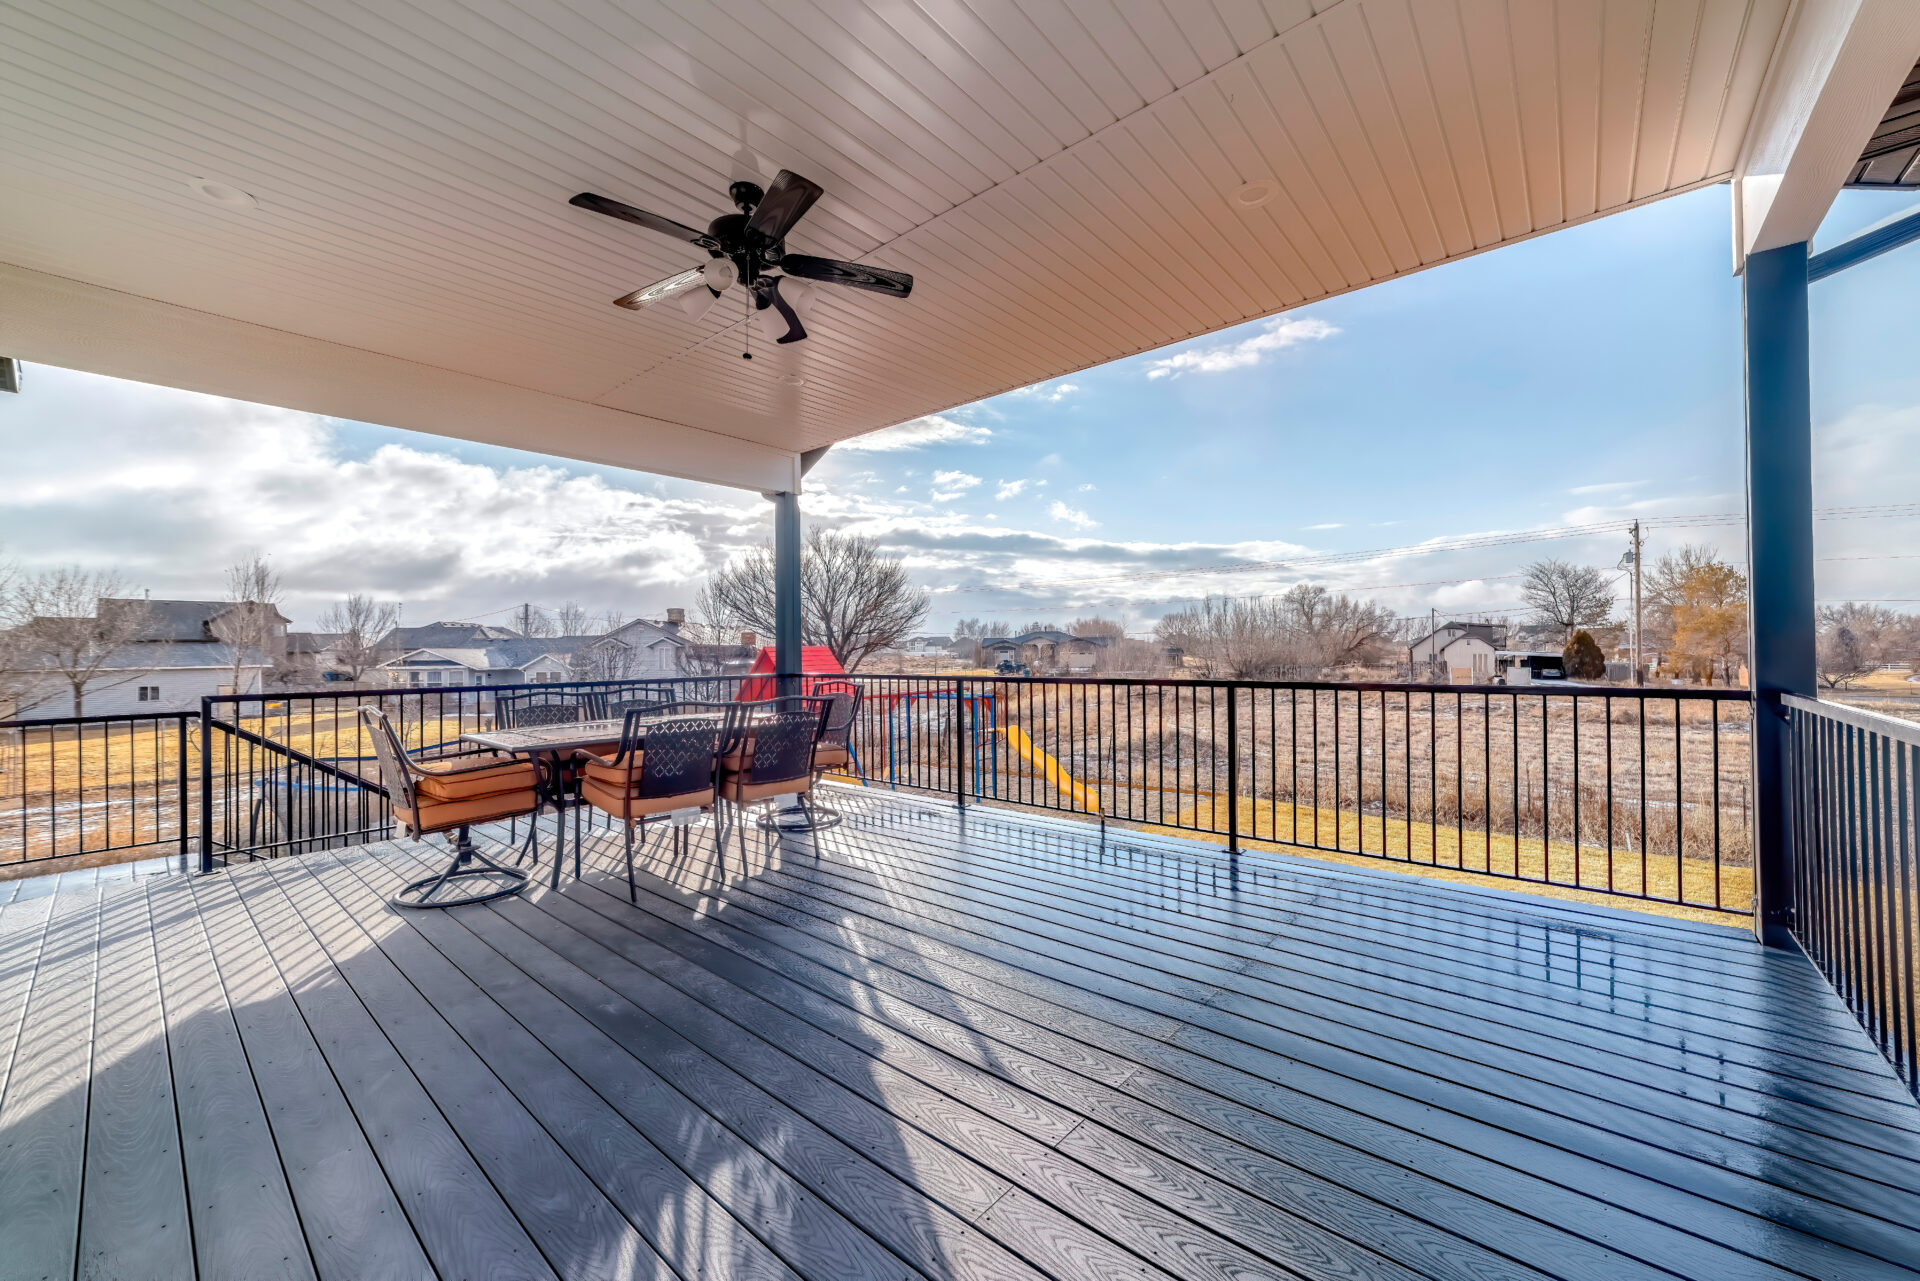 Dining table chairs and ceiling fan with light on wooden deck with metal railing. Yard with playground and neighborhood against cloudy sky can be seen from the home.